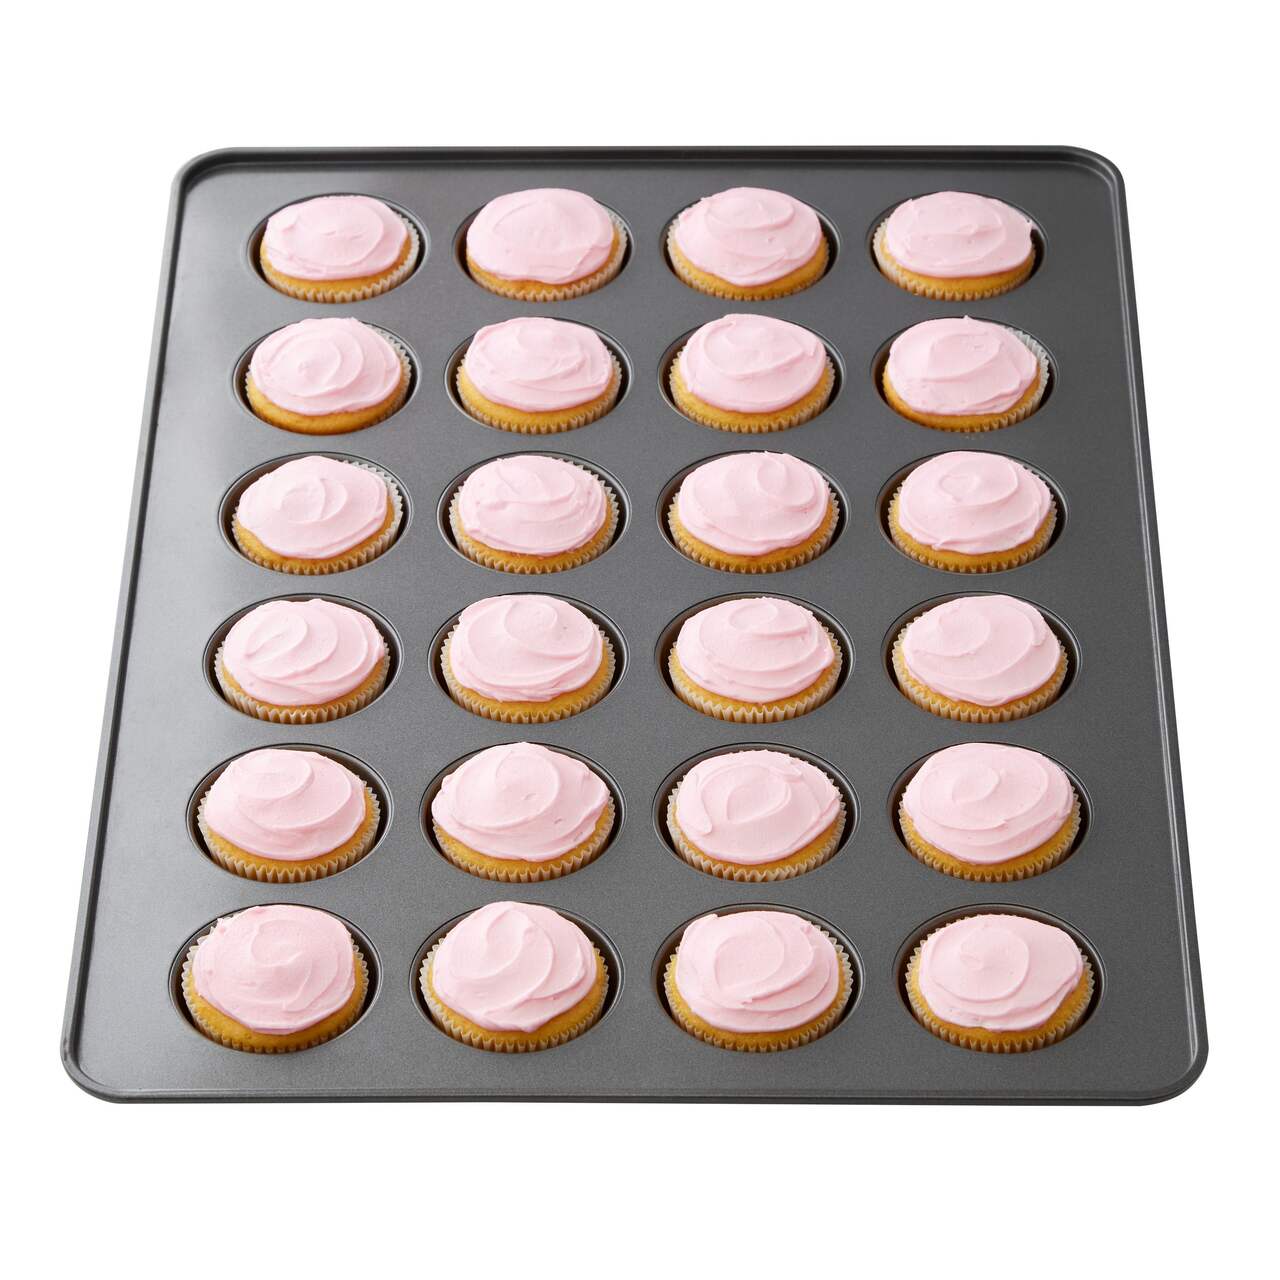 https://media-www.canadiantire.ca/product/living/kitchen/bakeware-baking-prep/1429066/wilton-mega-24-cup-muffin-pan-a5f7d892-4934-4240-a38f-866515cccb3a-jpgrendition.jpg?imdensity=1&imwidth=1244&impolicy=mZoom